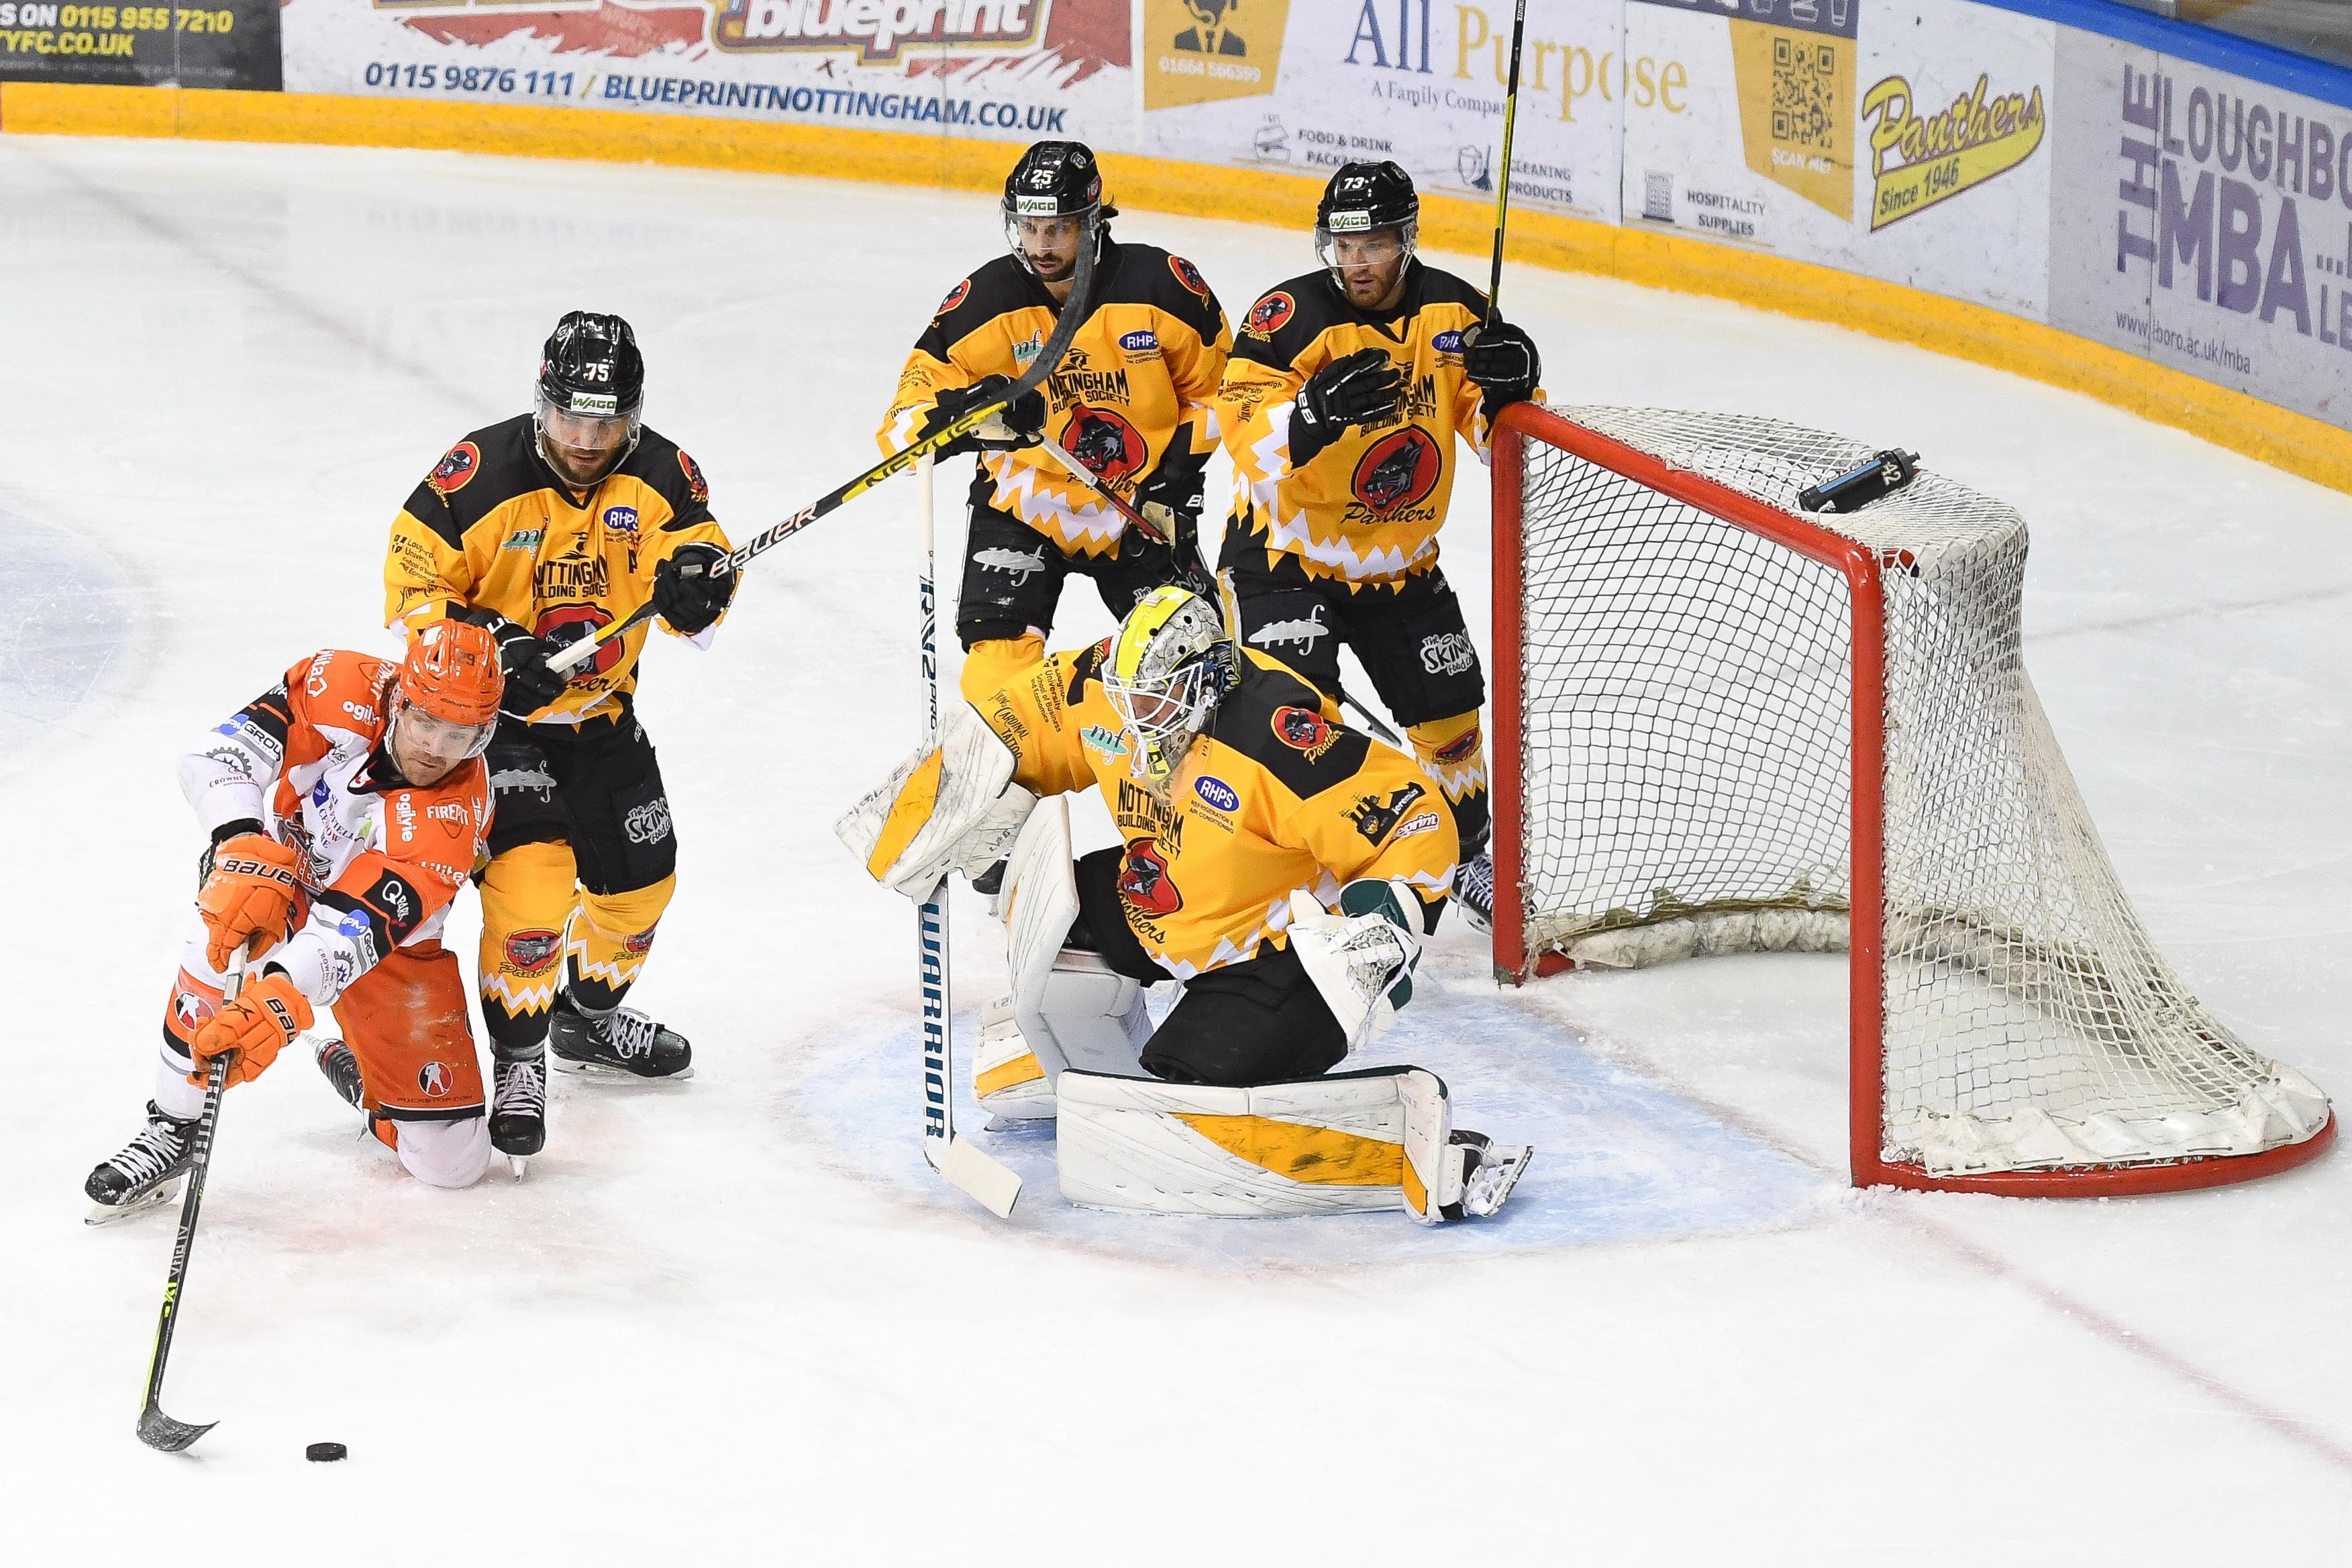 REPORT: PANTHERS 1-4 STEELERS Top Image